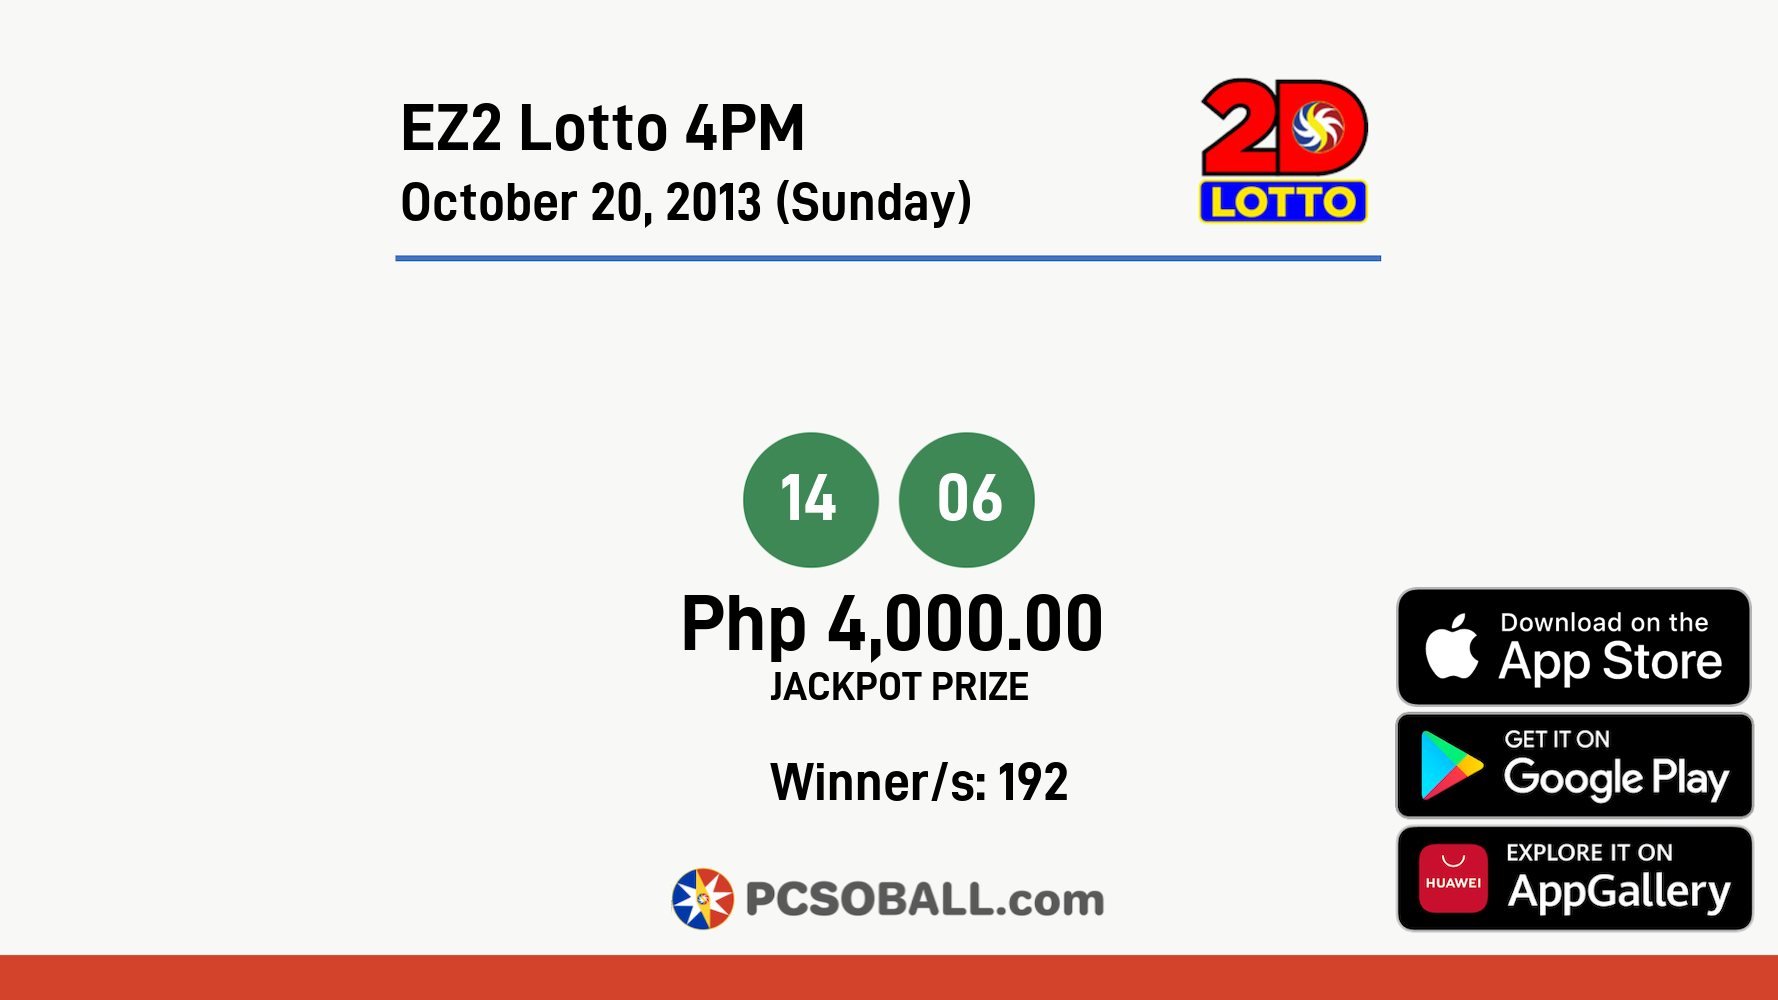 EZ2 Lotto 4PM October 20, 2013 (Sunday) Result